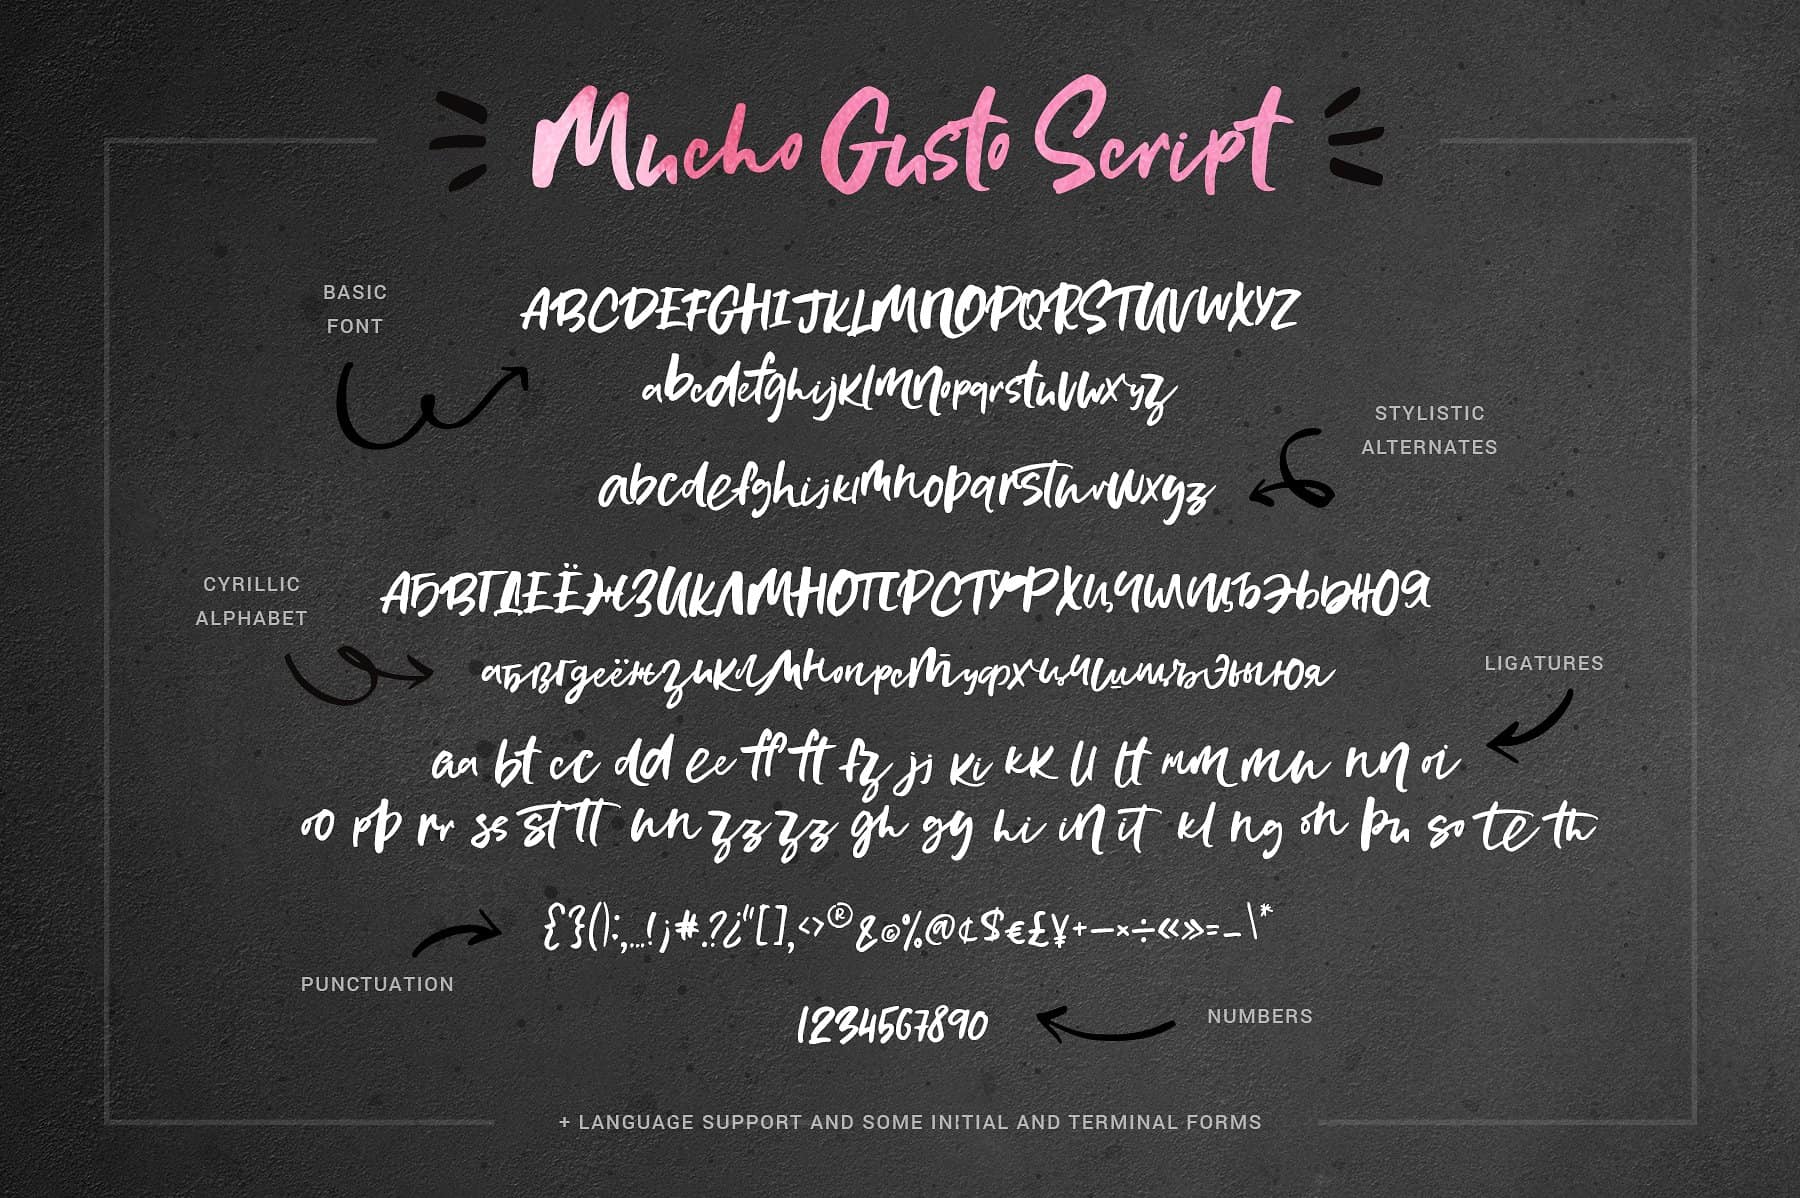 Mucho Gusto Family Font Free Download